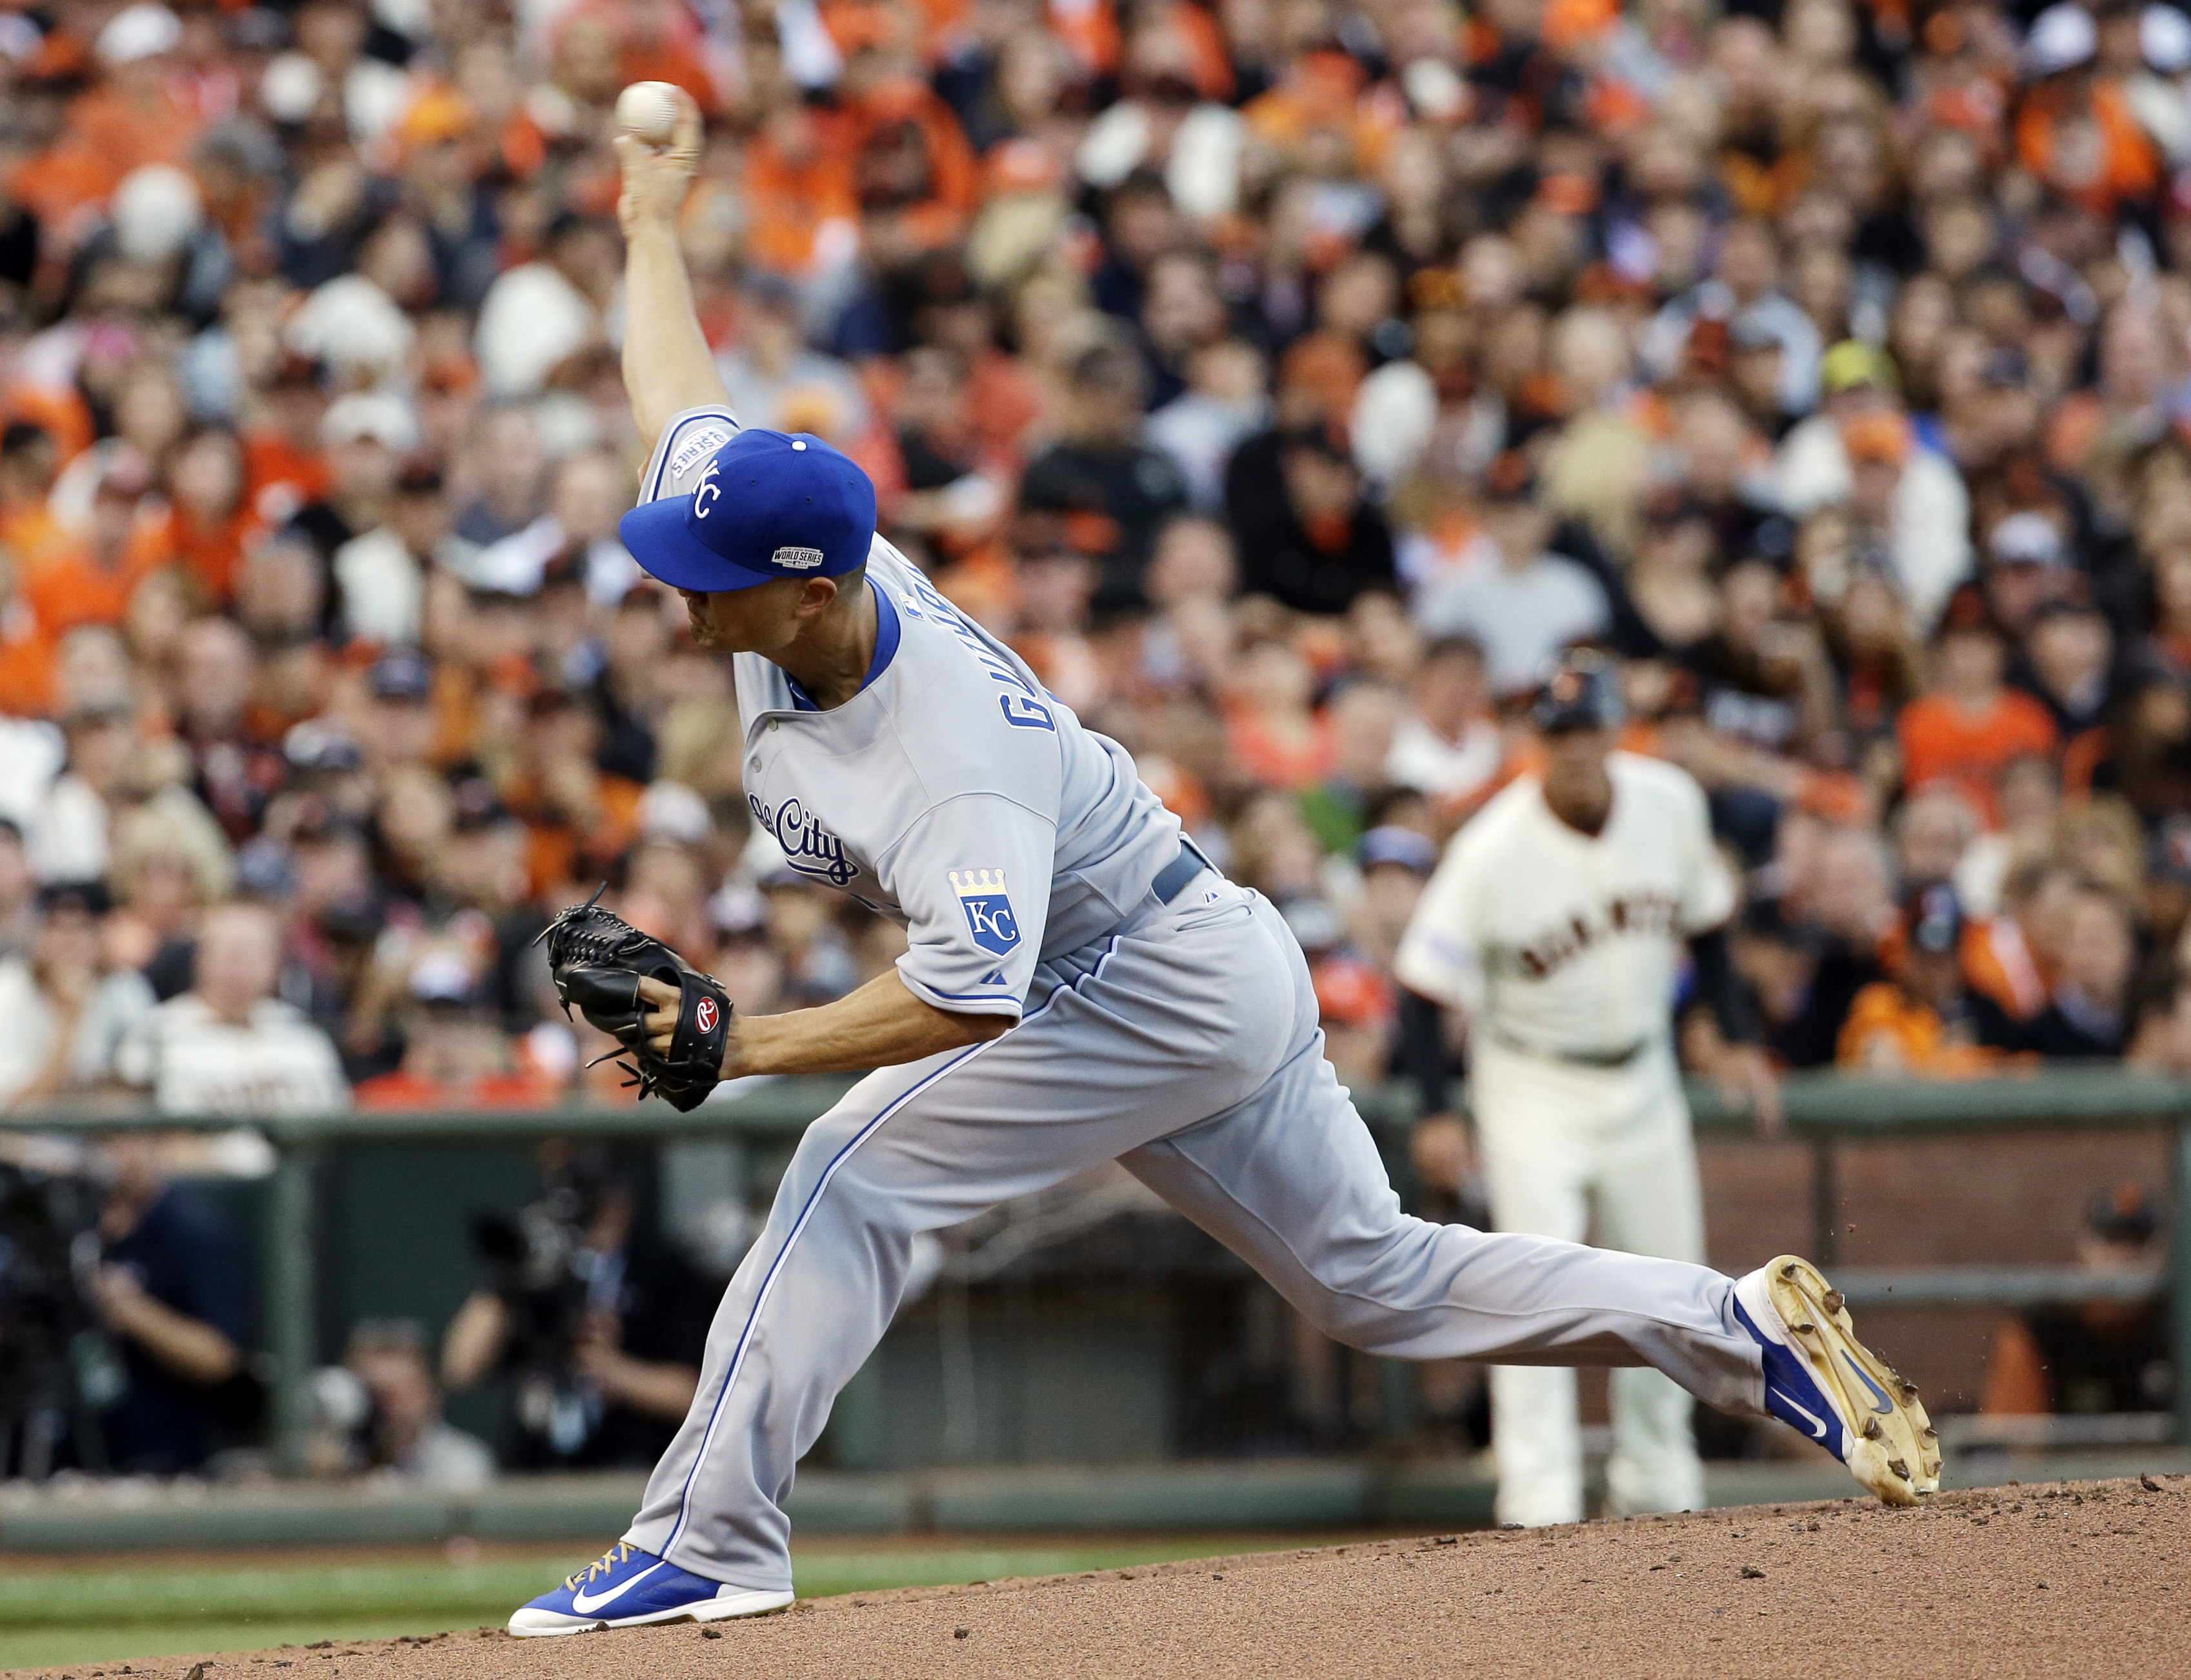 Giants blank Royals to take 3-2 Series lead